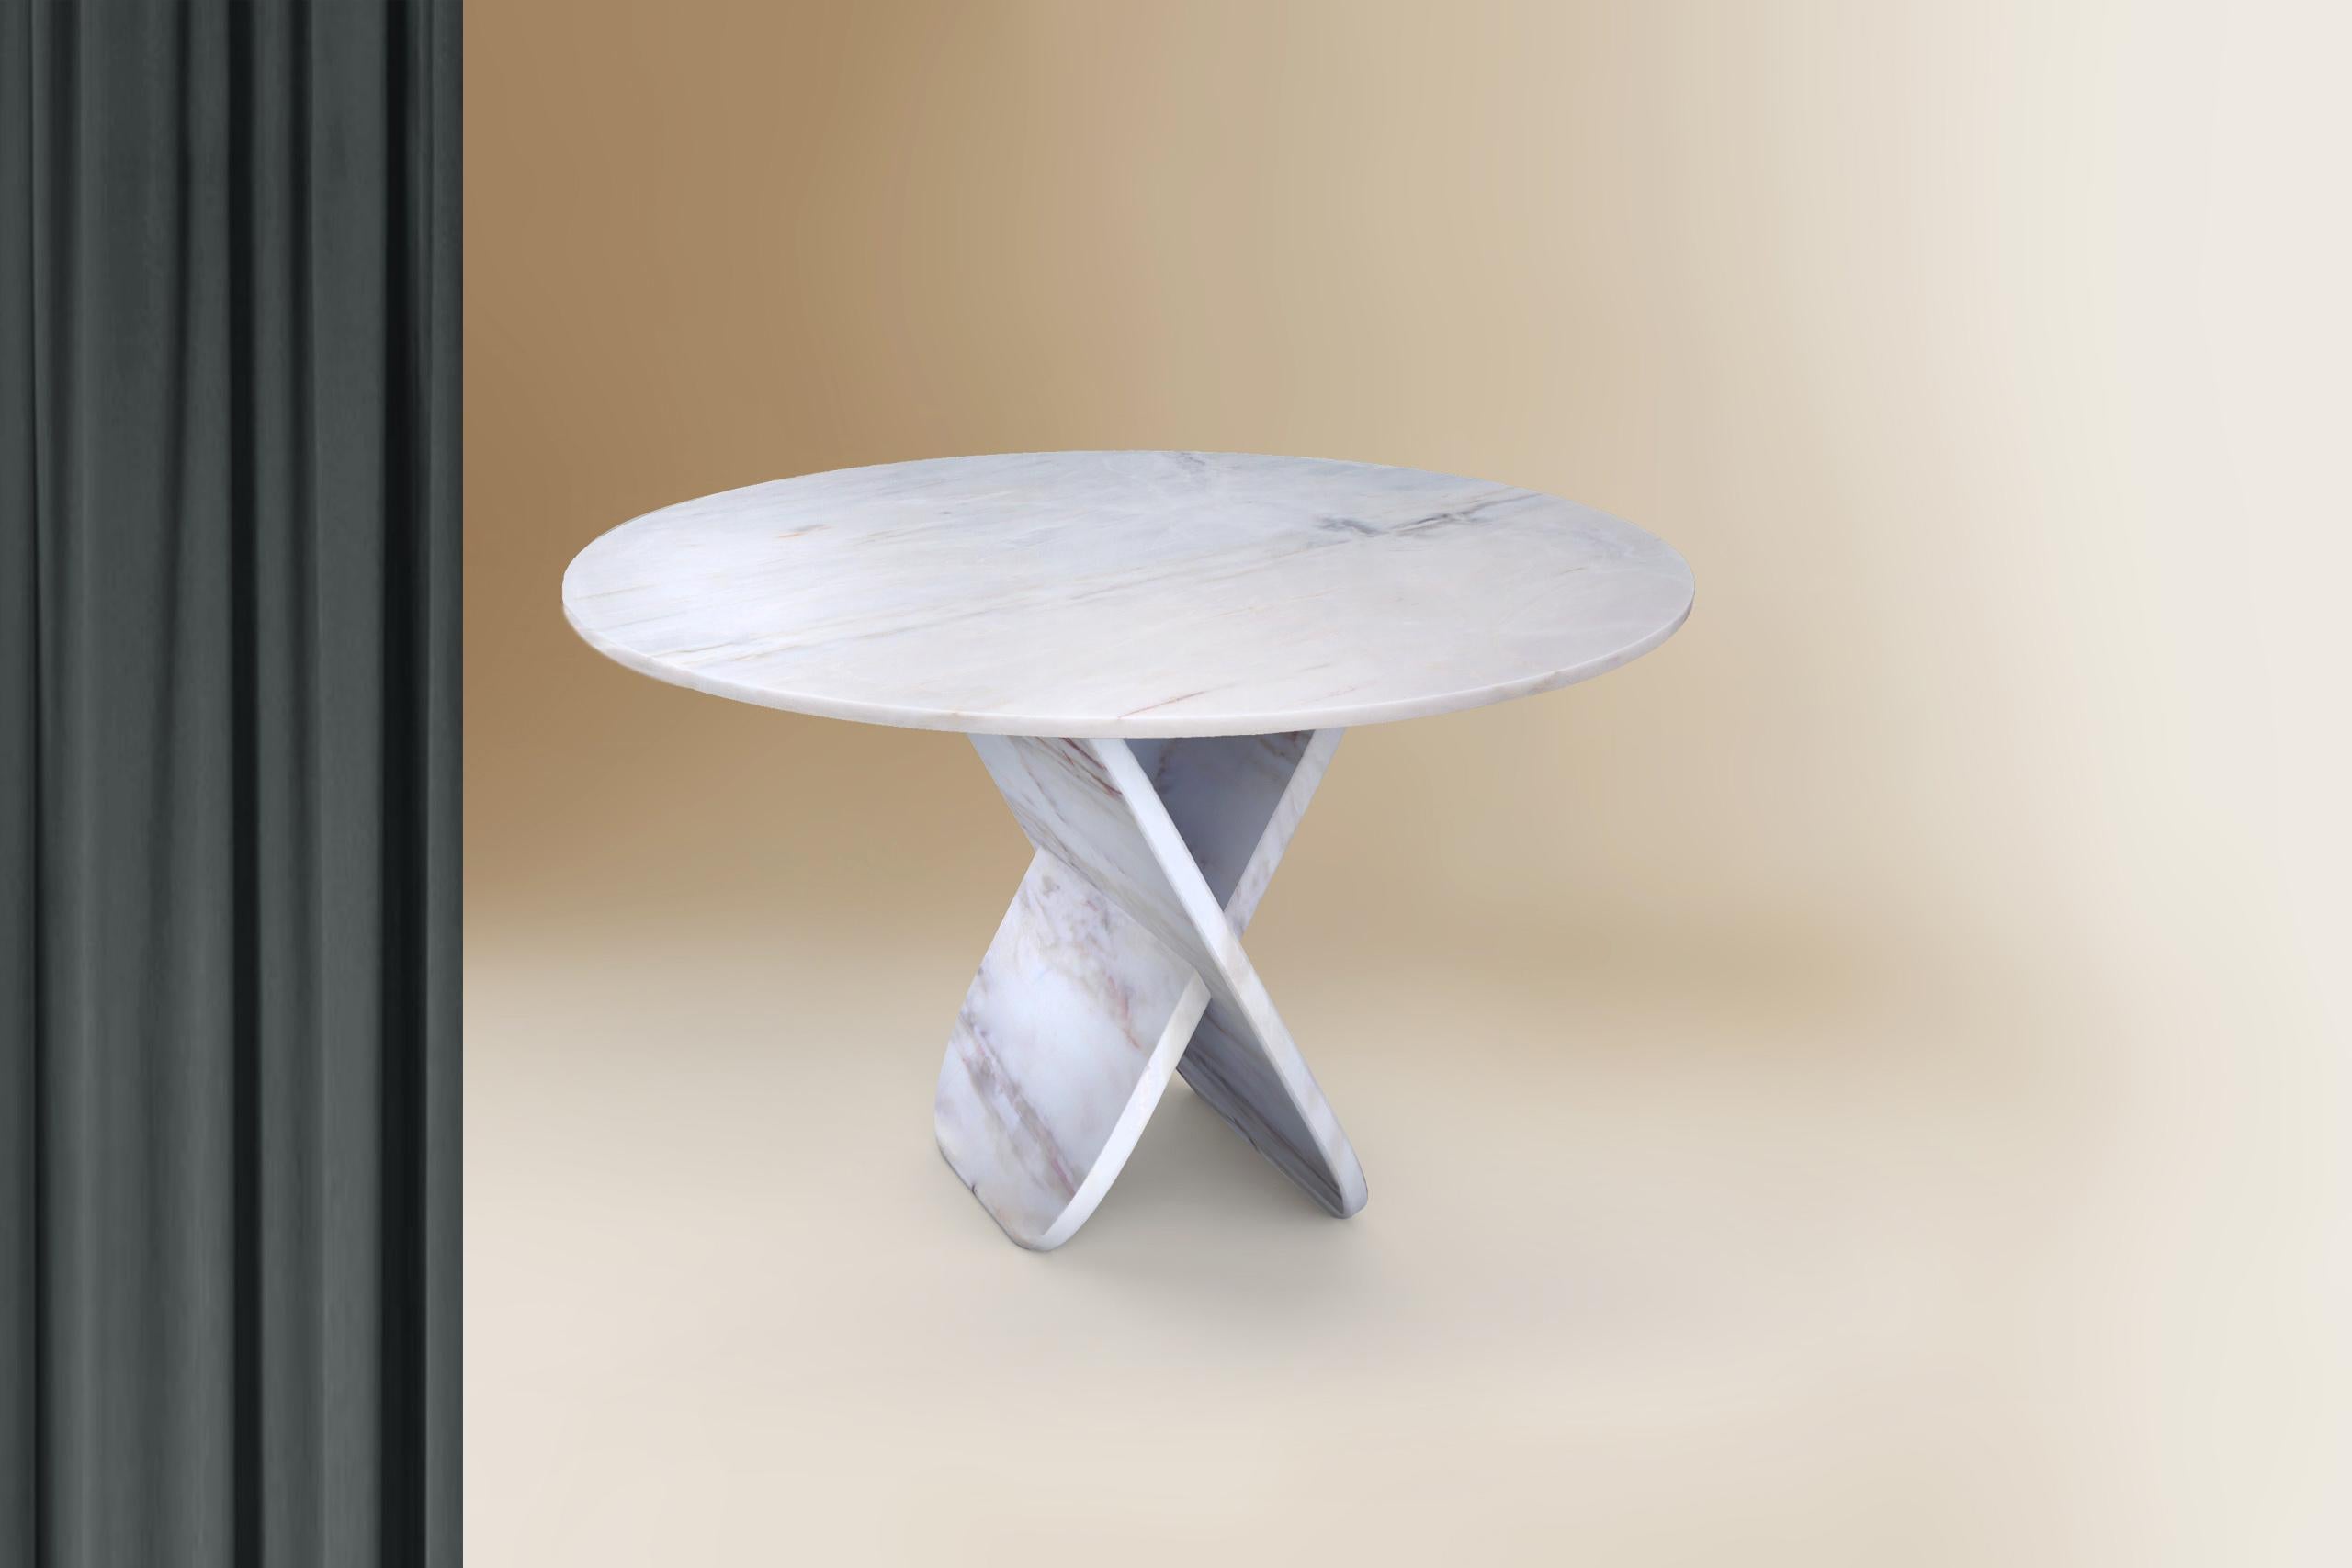 The Balance table is one of the creations of the prestigious Spanish designer Sergio Prieto. It is a dining table with a diameter of 120-150cm and a height of 79cm, made of white Portuguese marble, collected and worked directly by the hands of our